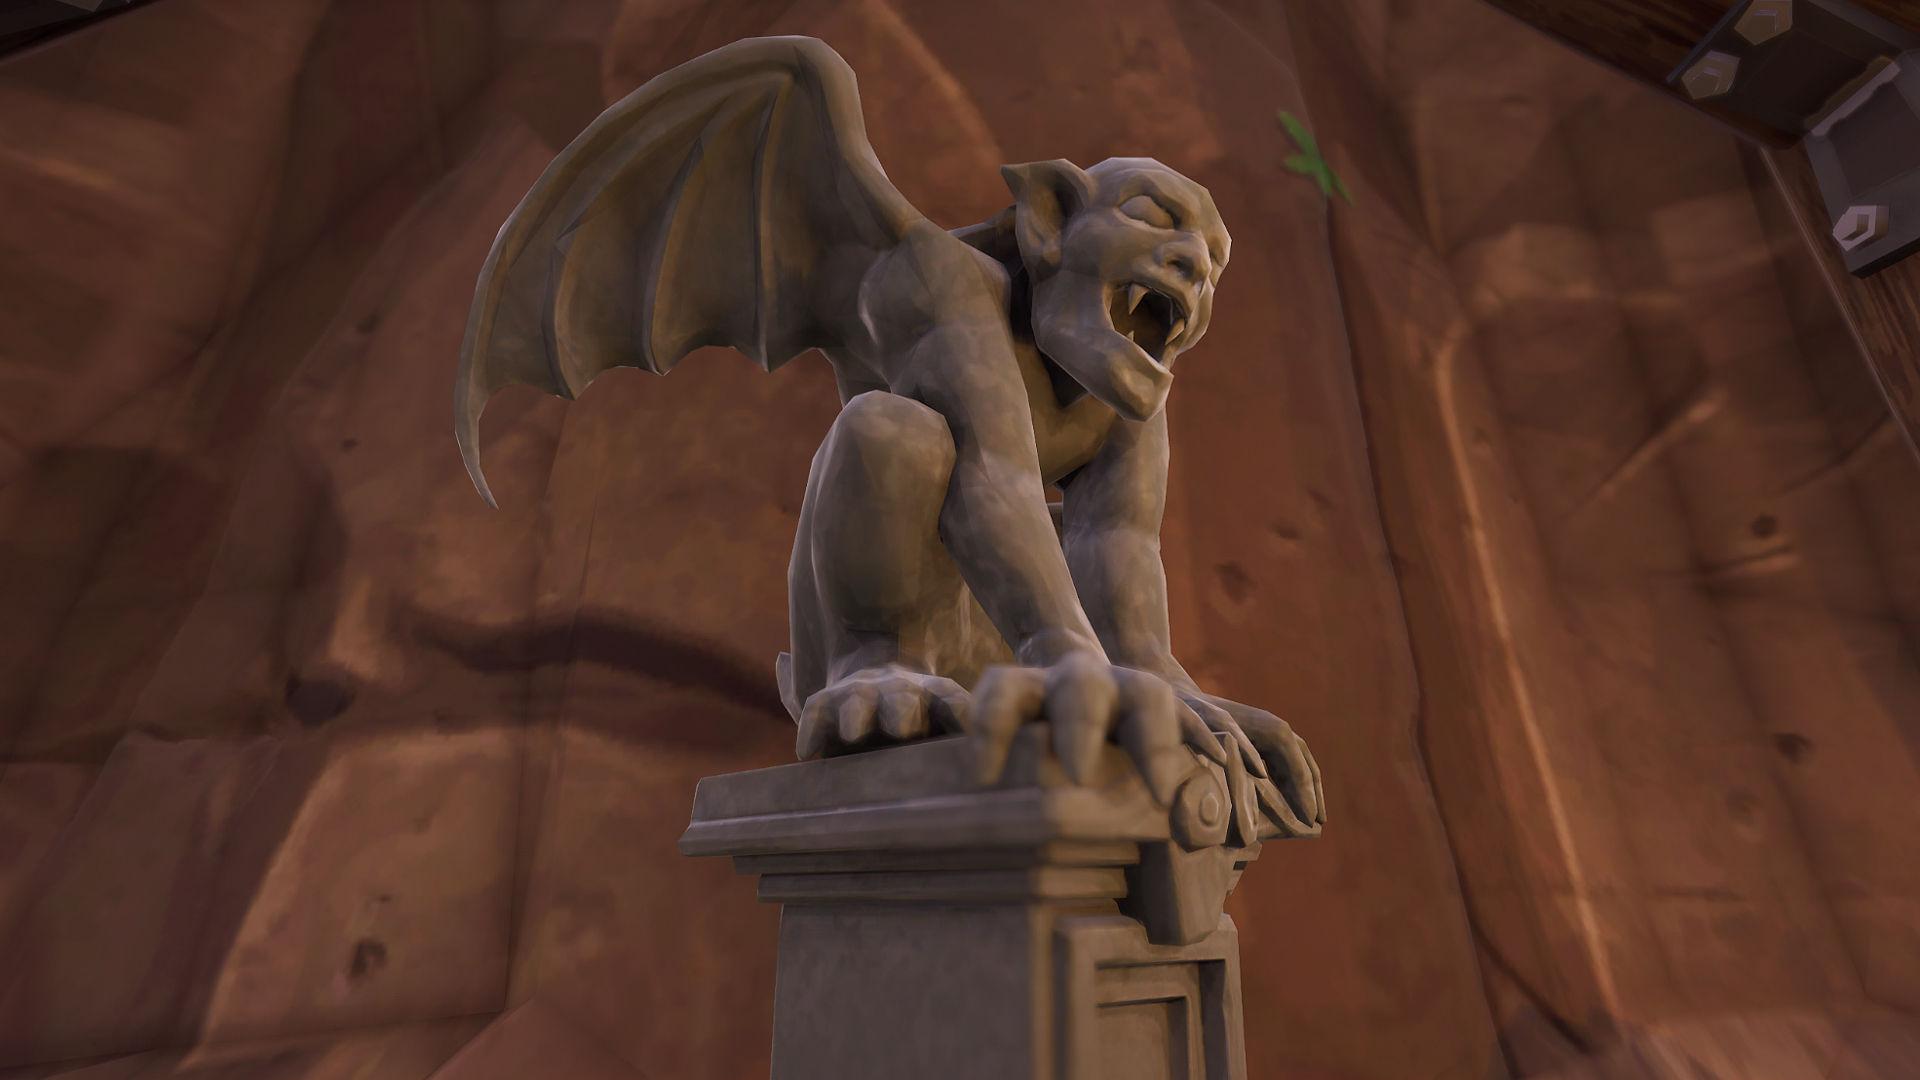 All Gargoyle locations: where to dance at different ... - 1920 x 1080 jpeg 1395kB